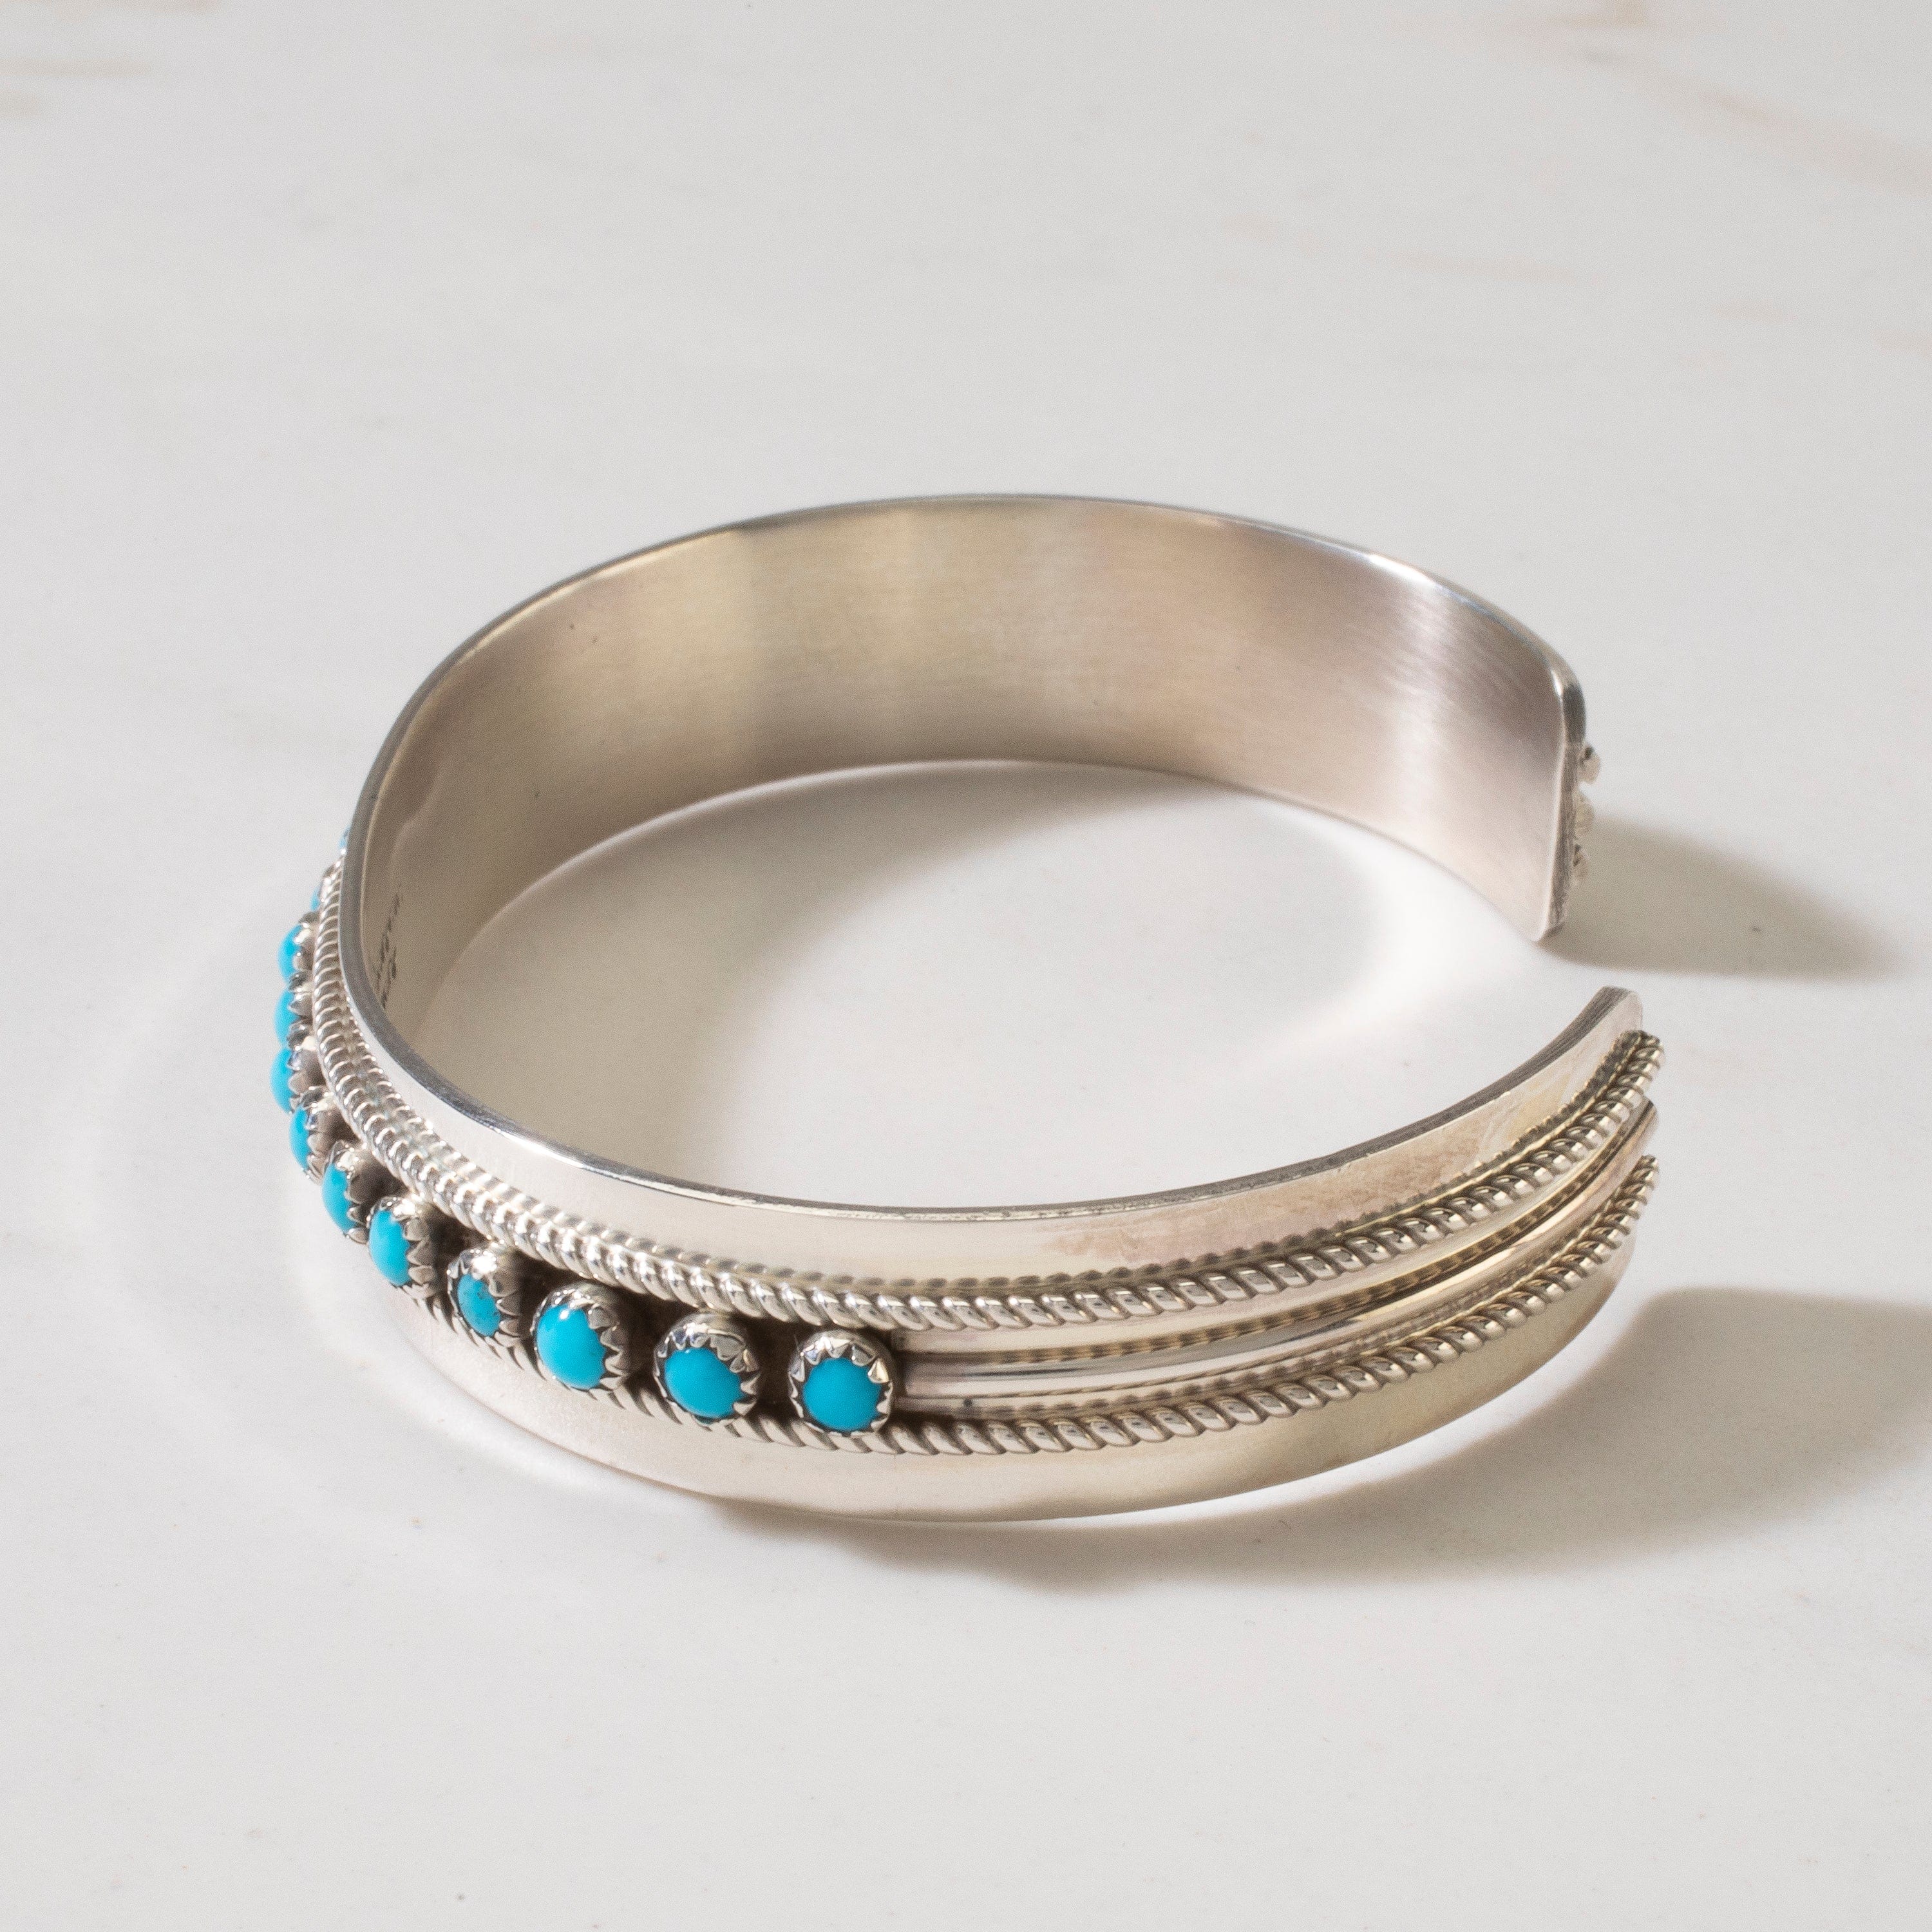 Kalifano Native American Jewelry Patrick Yazzie Navajo Sleeping Beauty Turquoise USA Native American Made 925 Sterling Silver Cuff NAB900.010